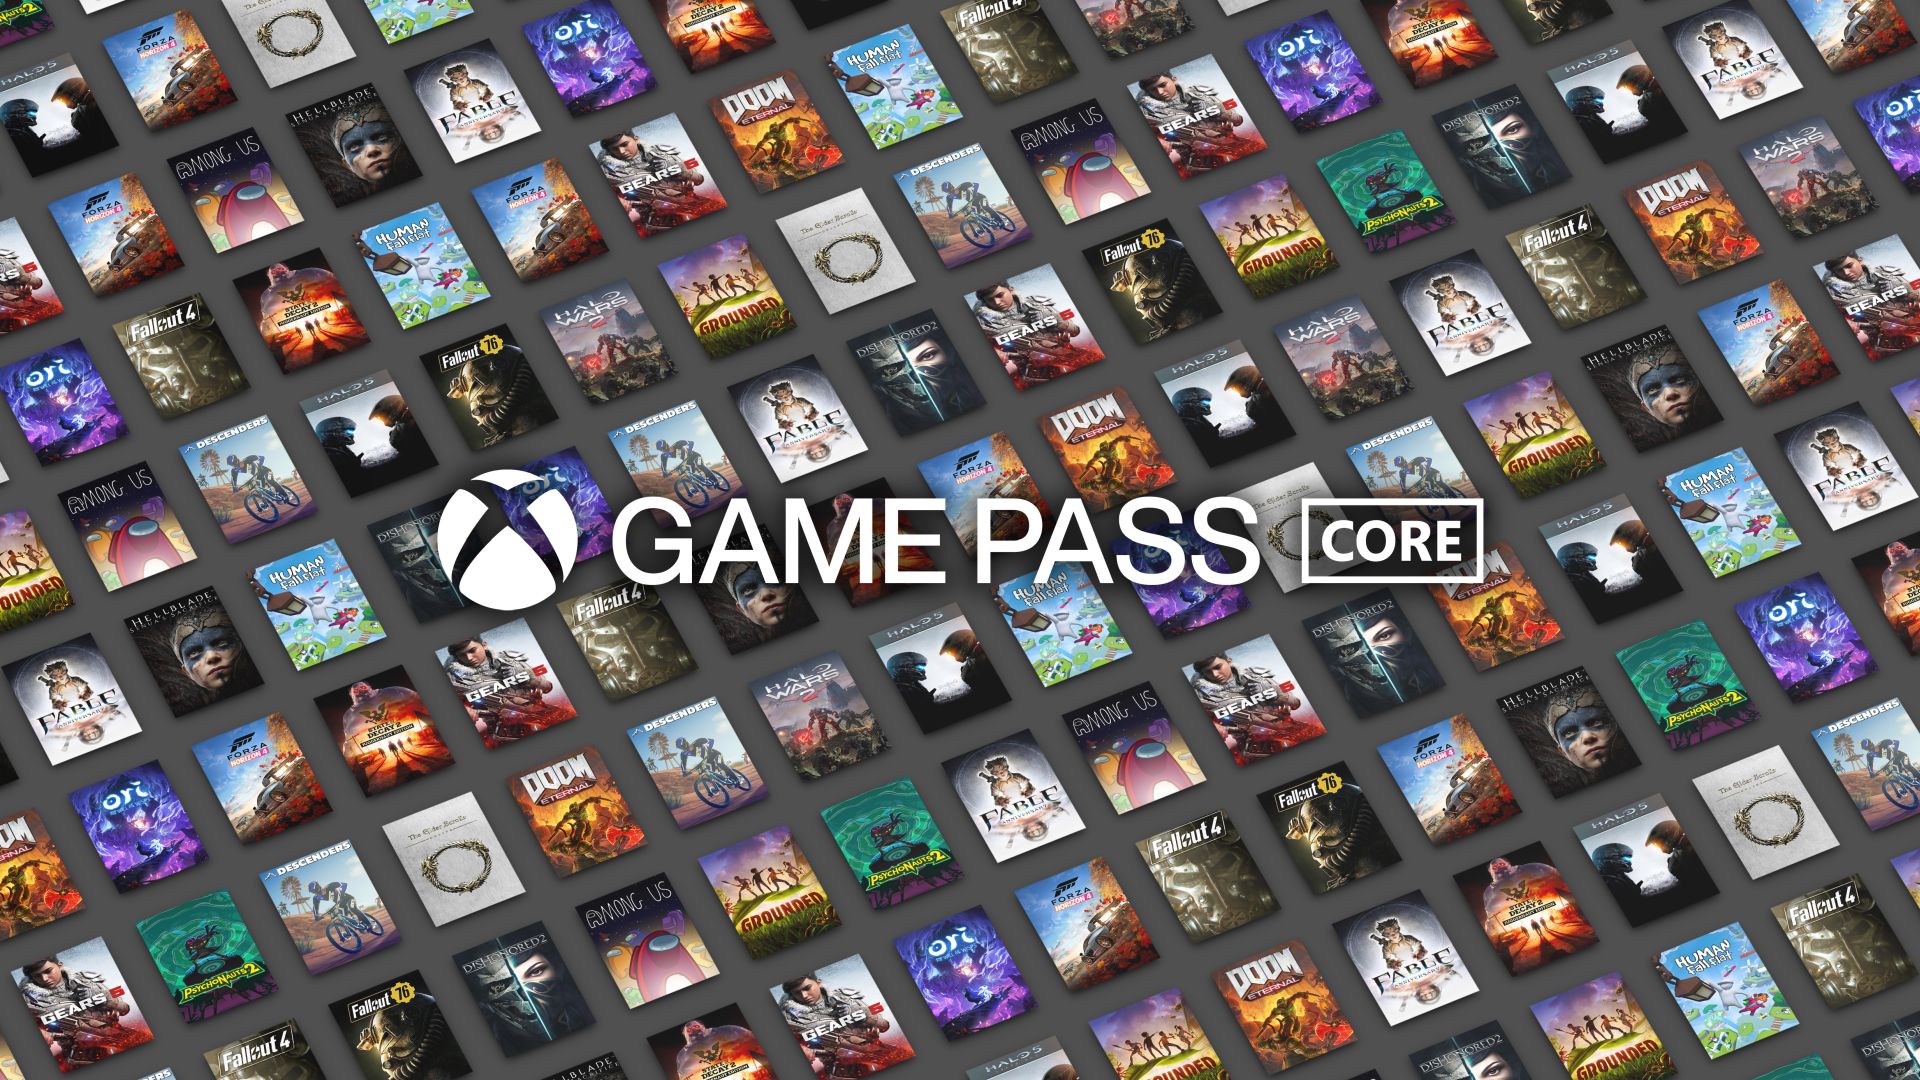 Xbox Game Pass Ultimate 1 mes - Standard Edition - Xbox One